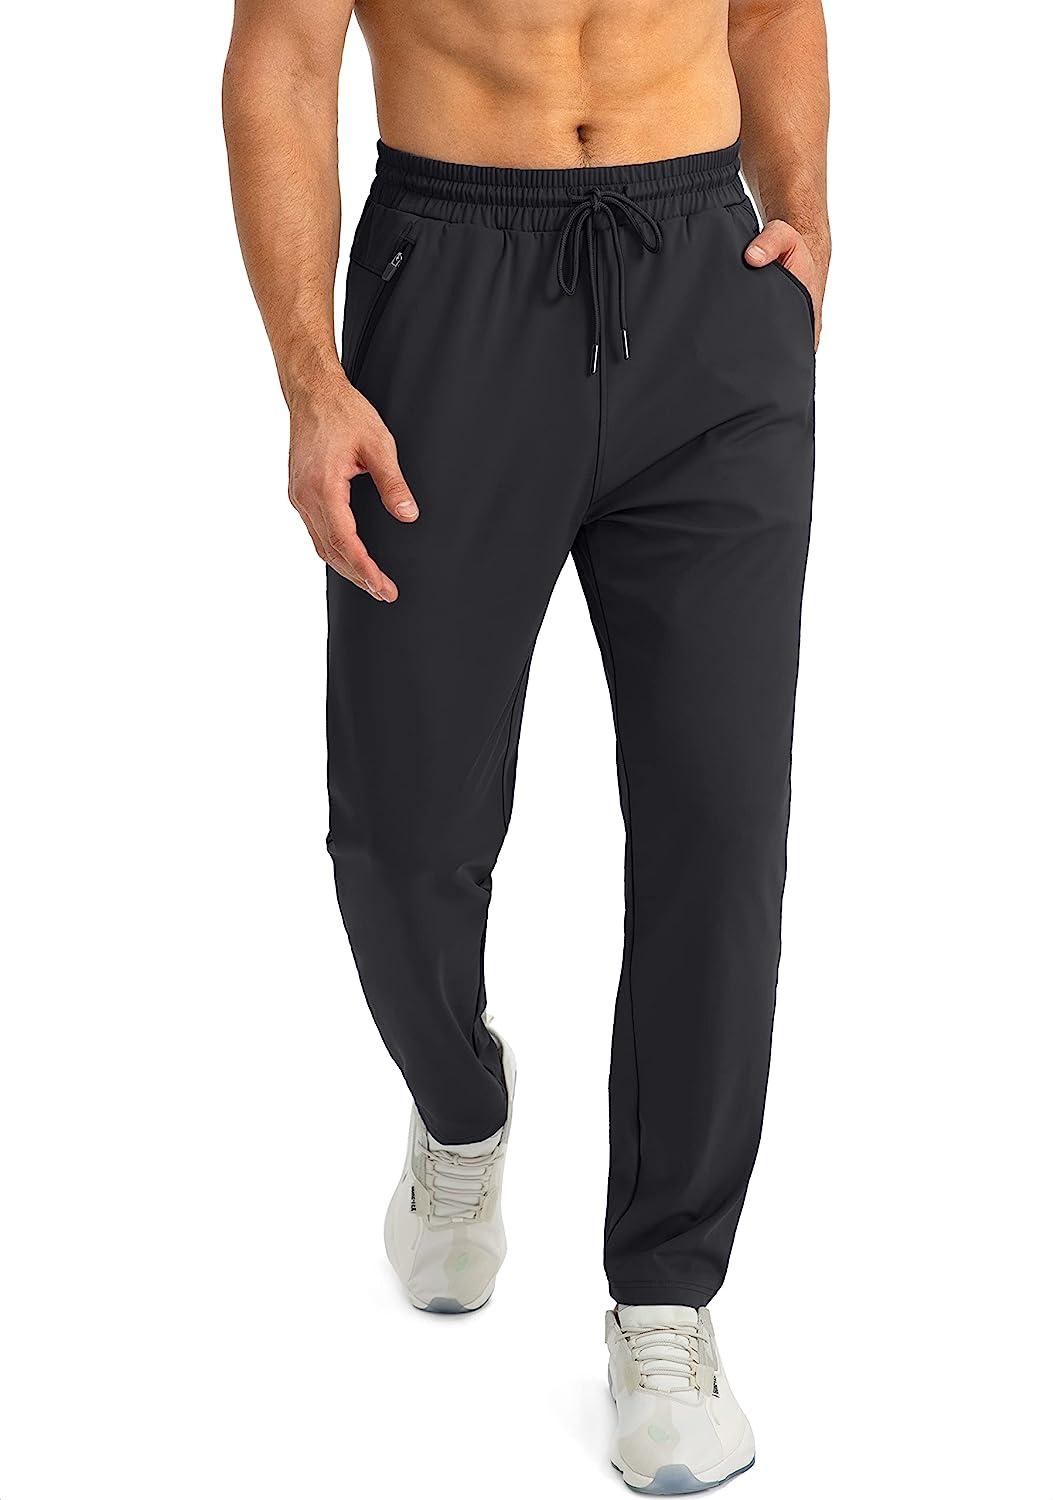 G Gradual Men's Sweatpants with Zipper Pockets Tapered Joggers for